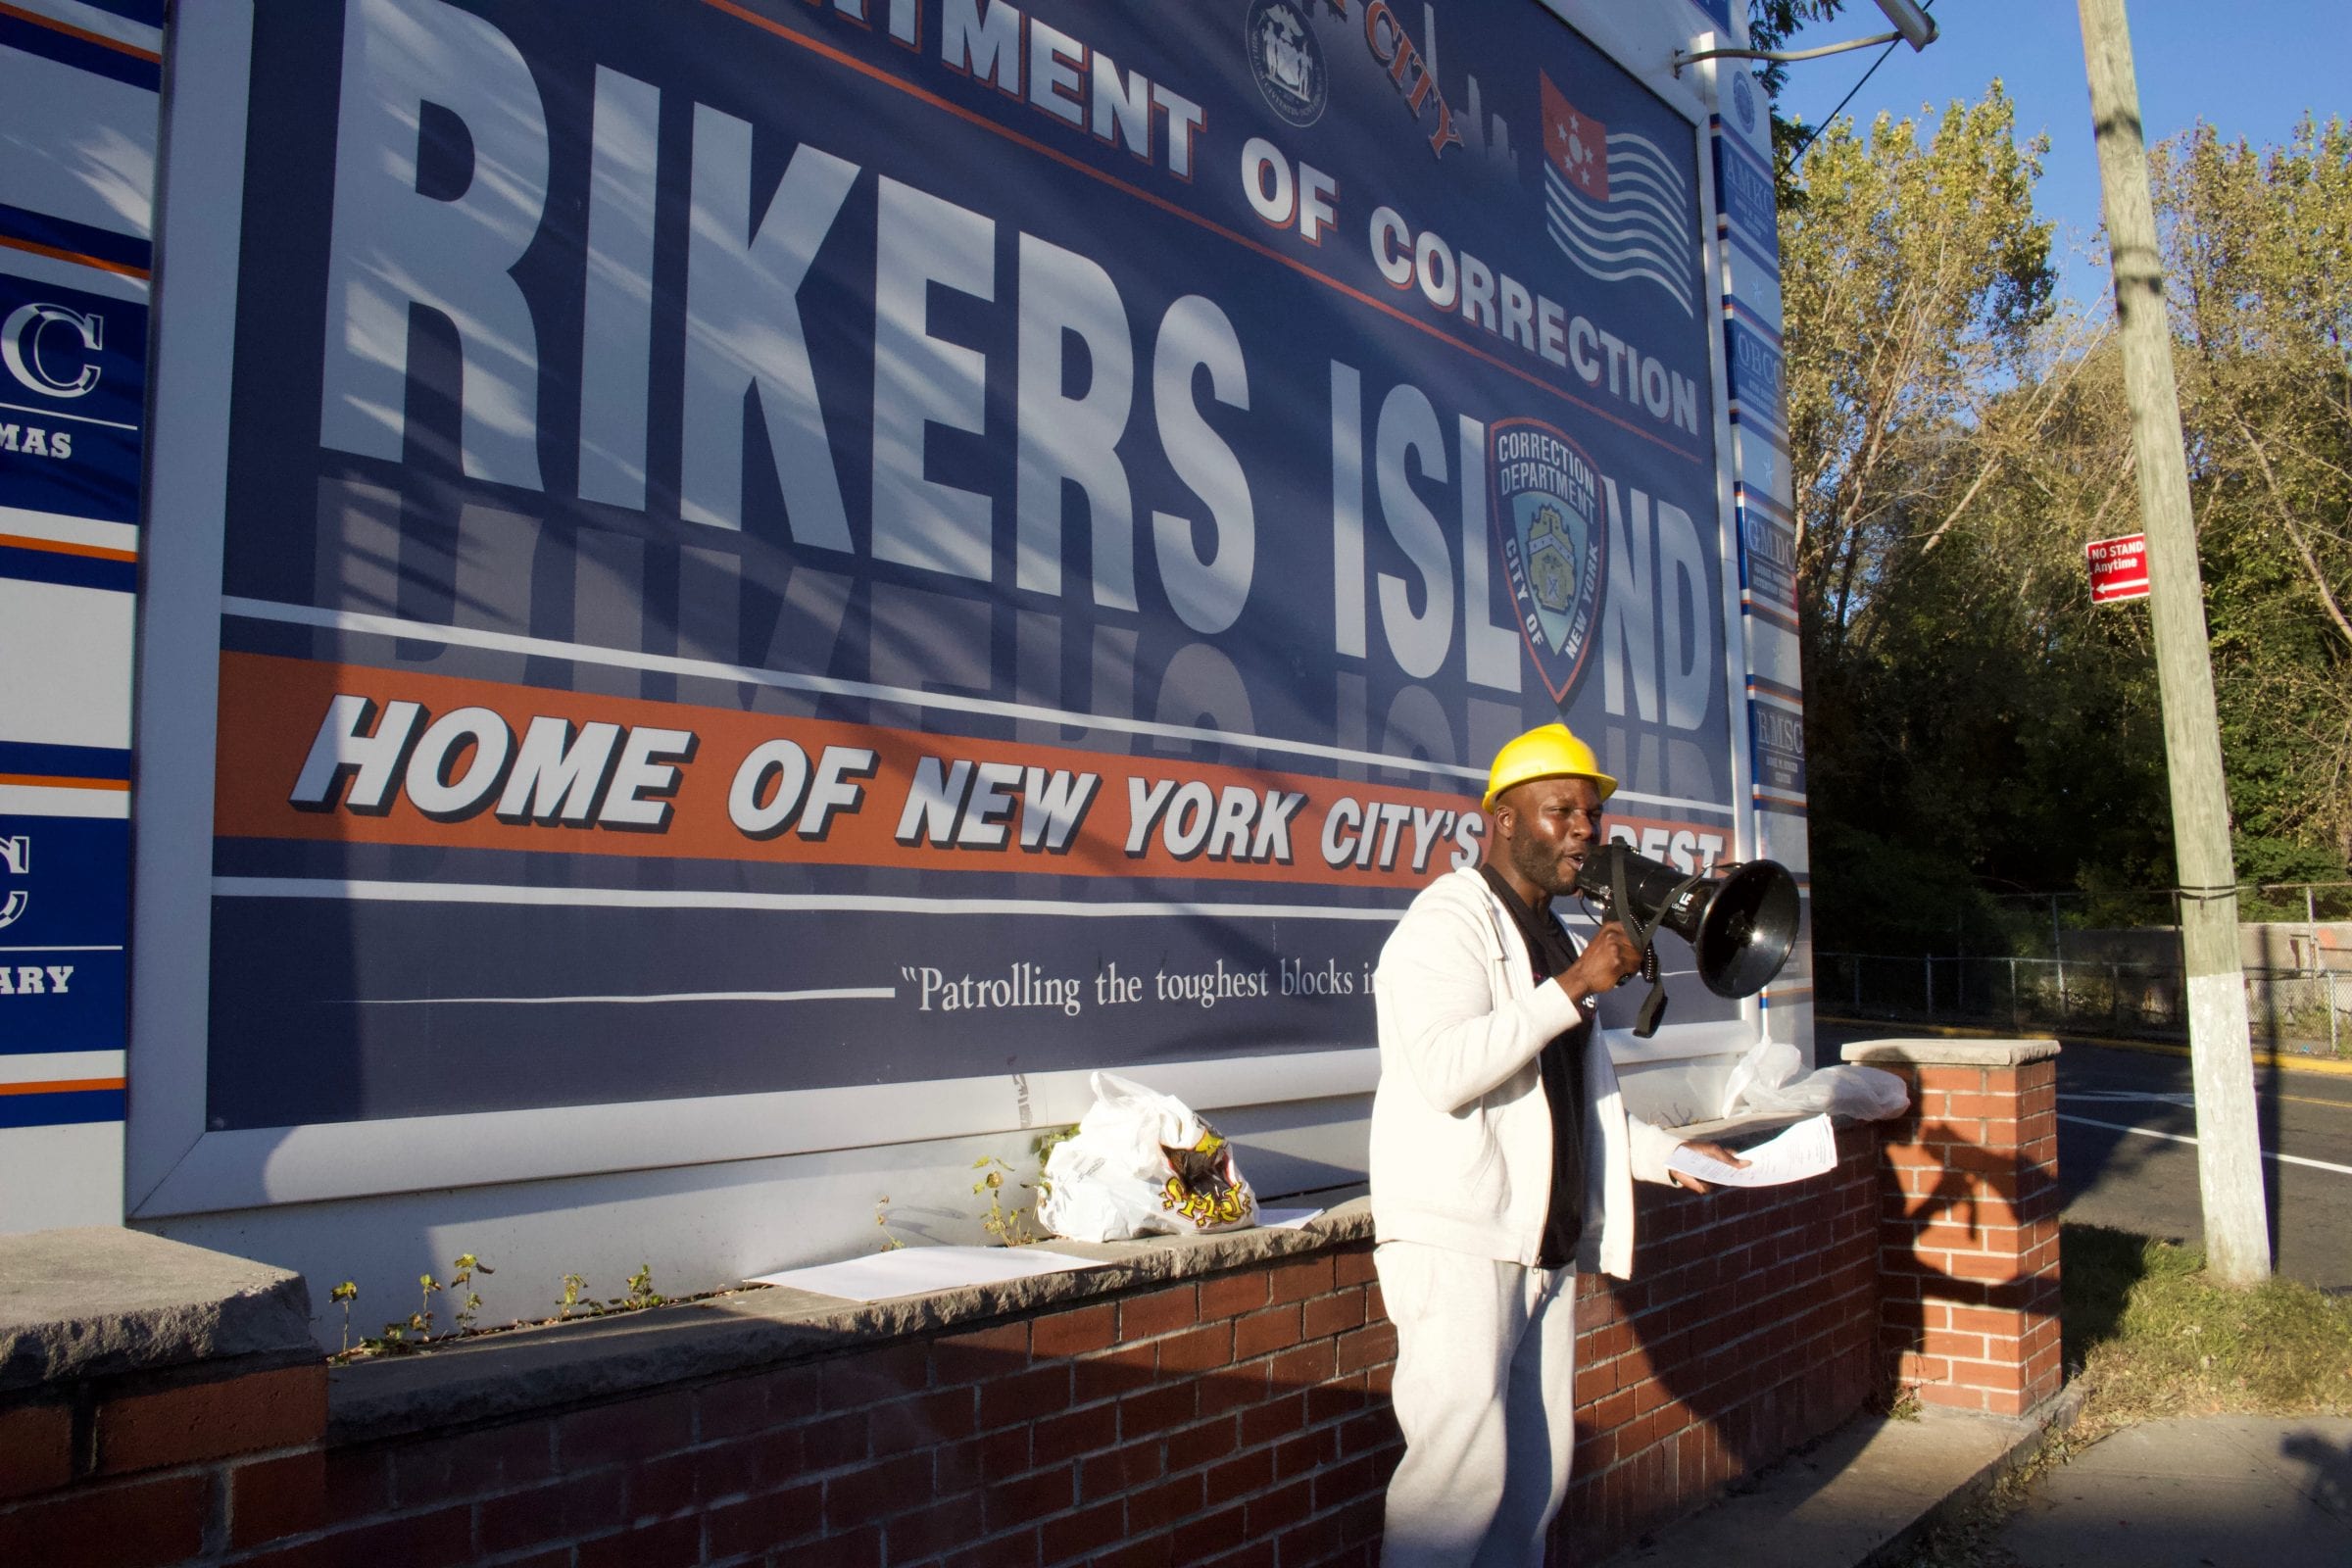 I Know Rikers